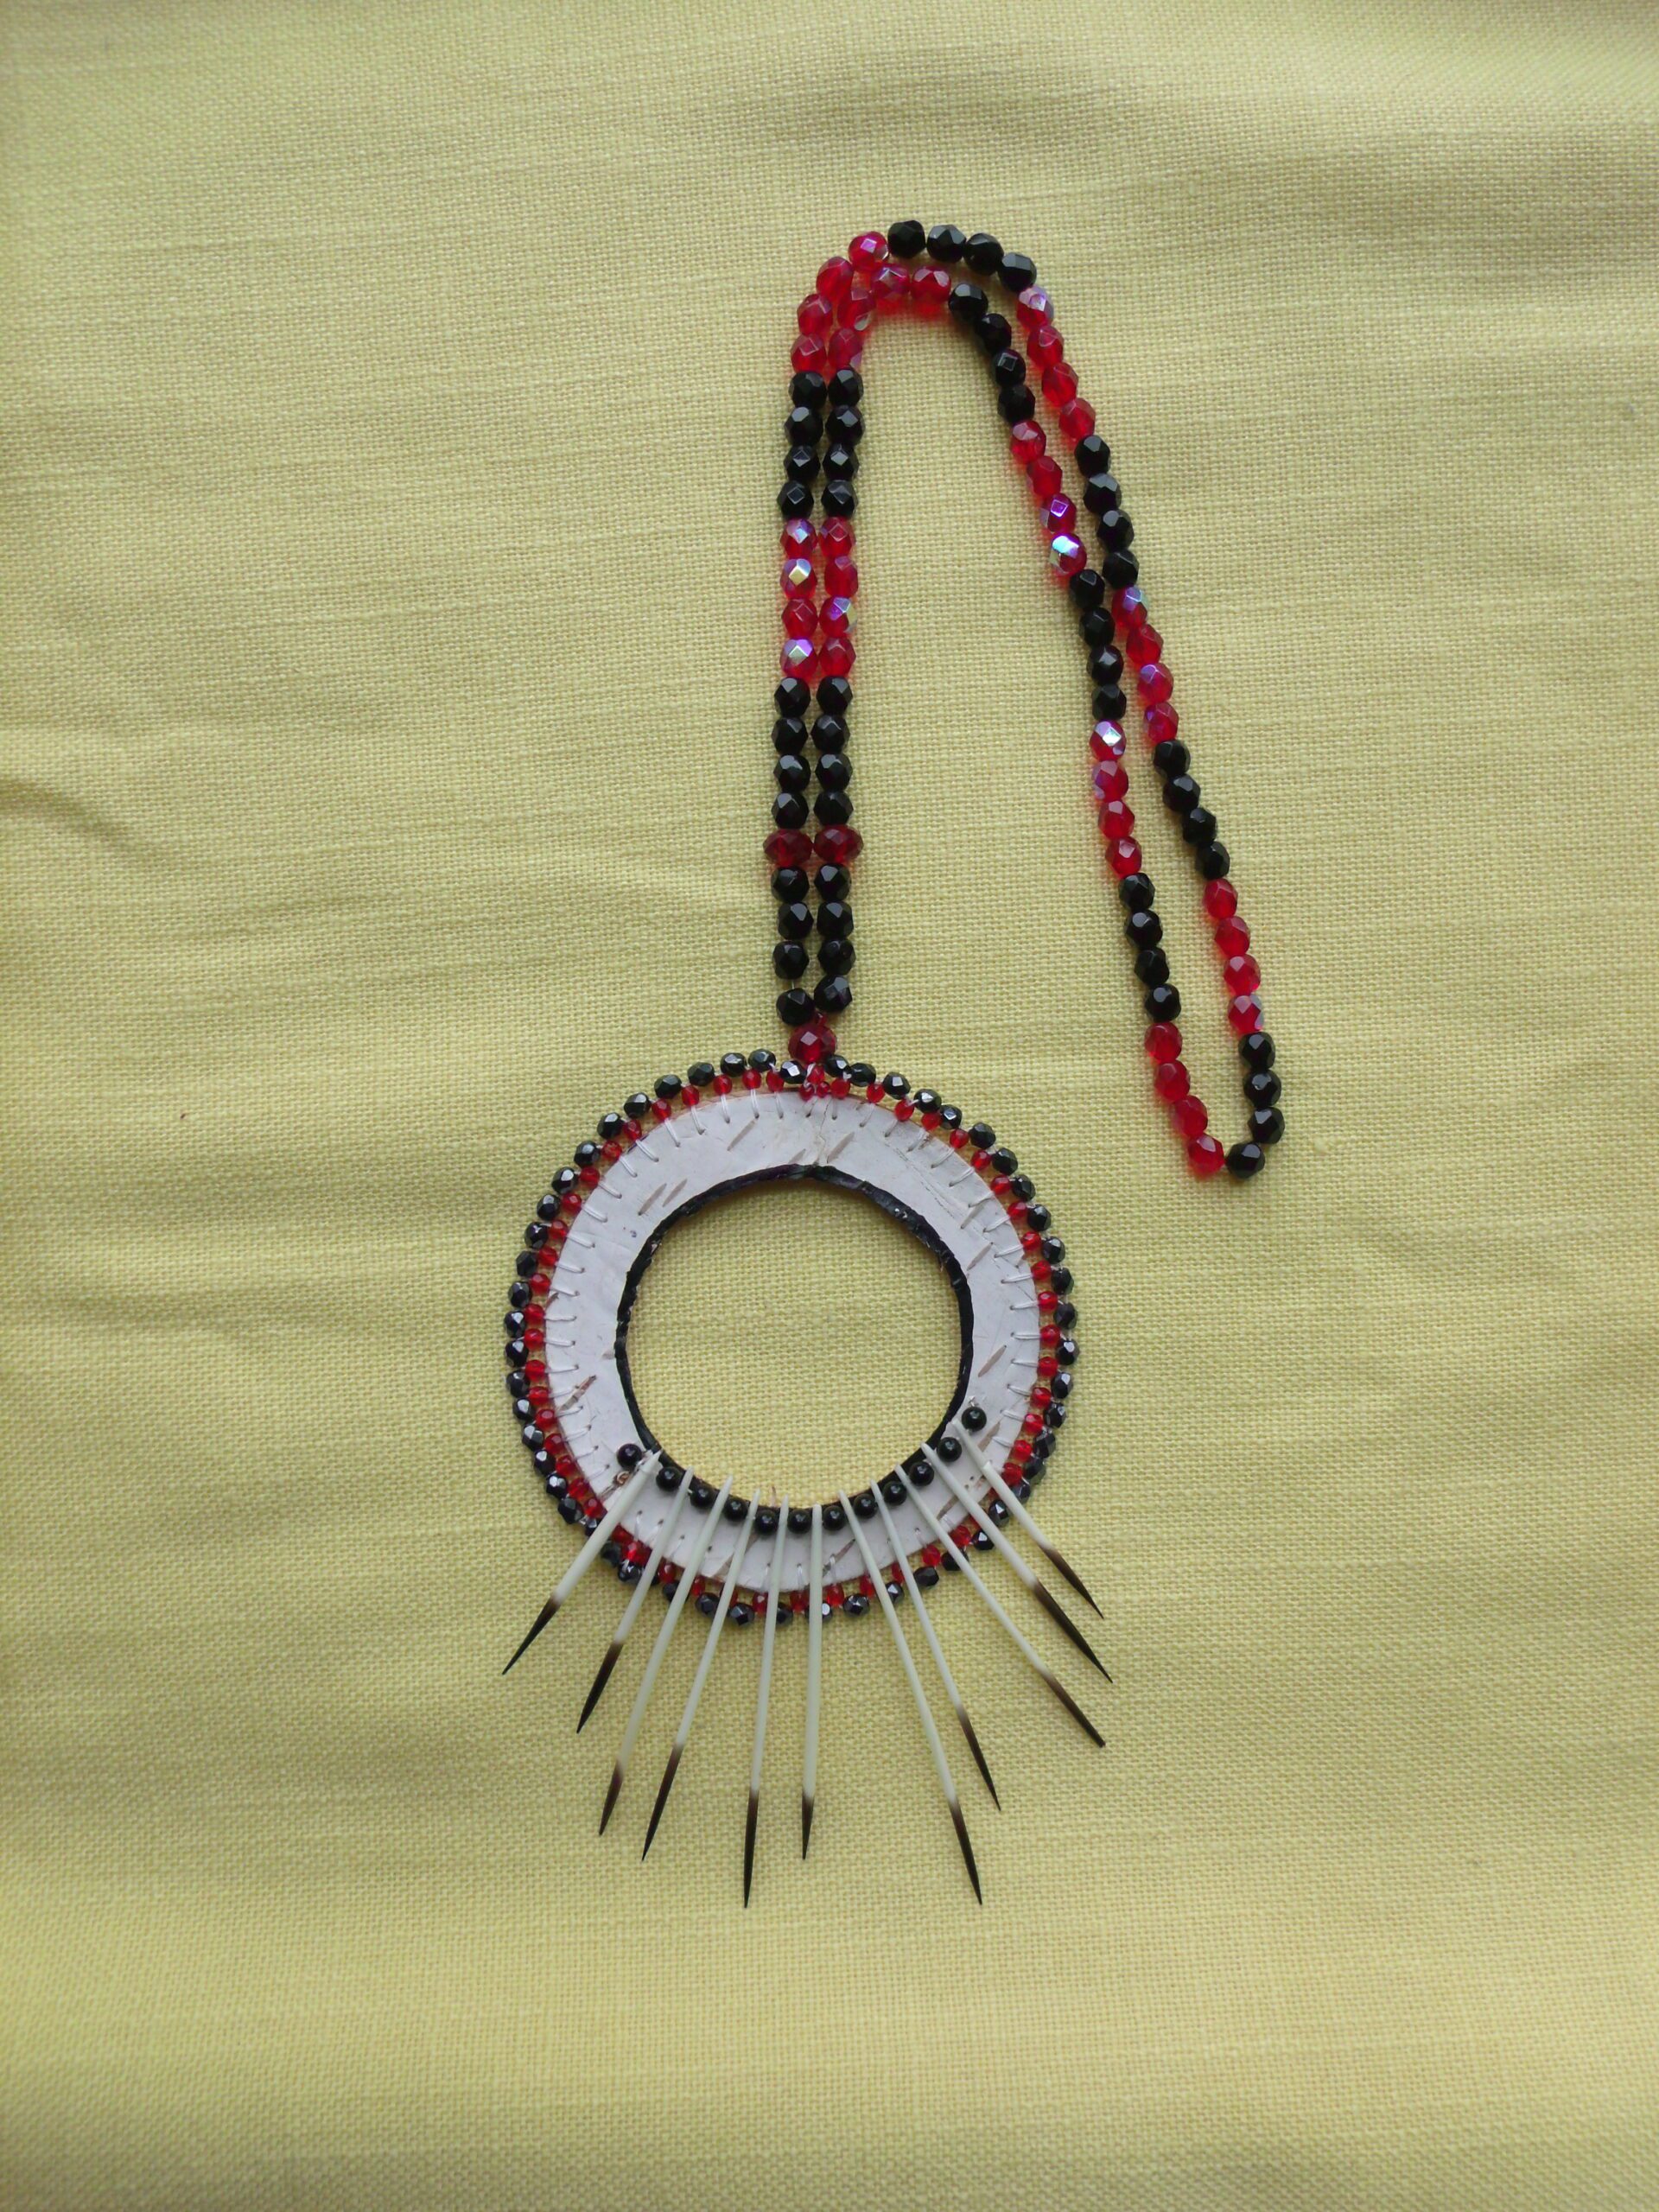 birchbark, porcupine quill with red and black svorski crystal necklace